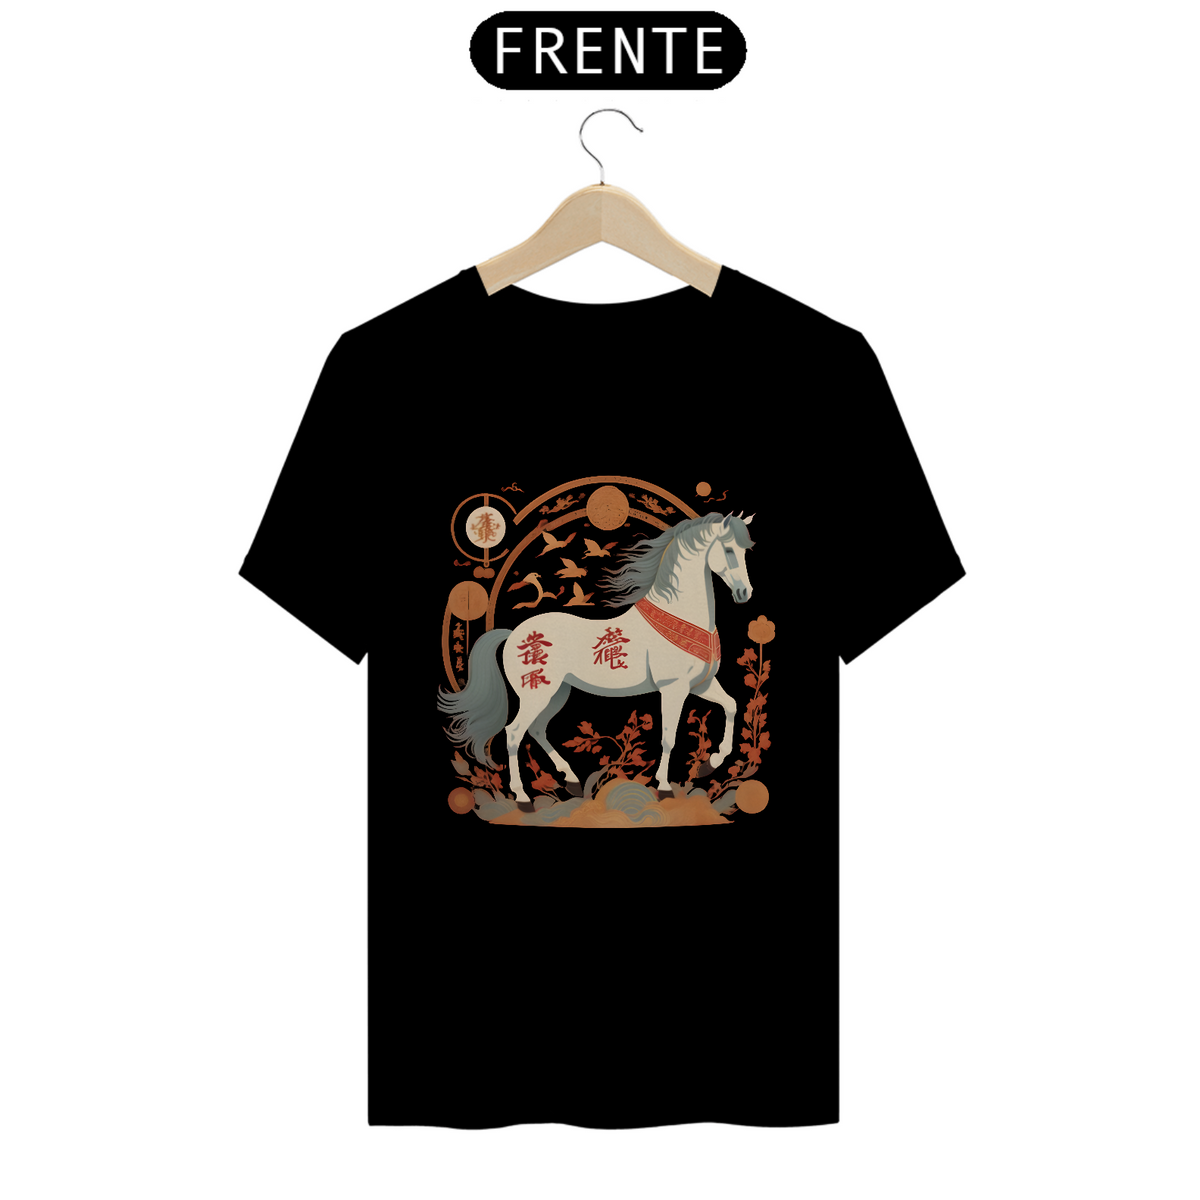 Nome do produto: Chinese New Year (Eclipse) - T-Shirt White Horse